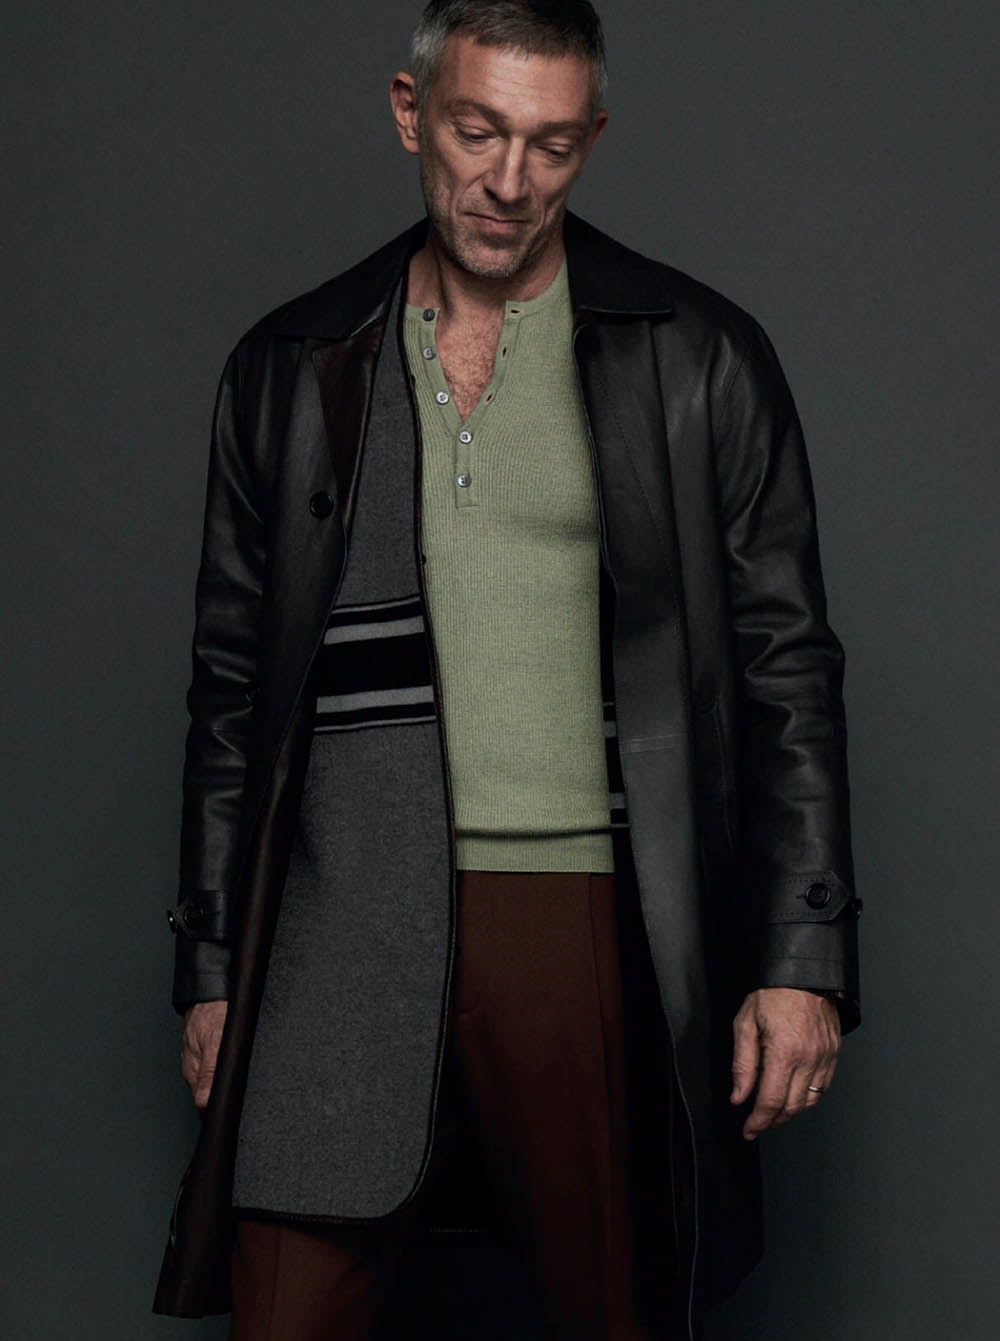 Vincent Cassel covers Esquire Spain February 2020 by Hew Hood